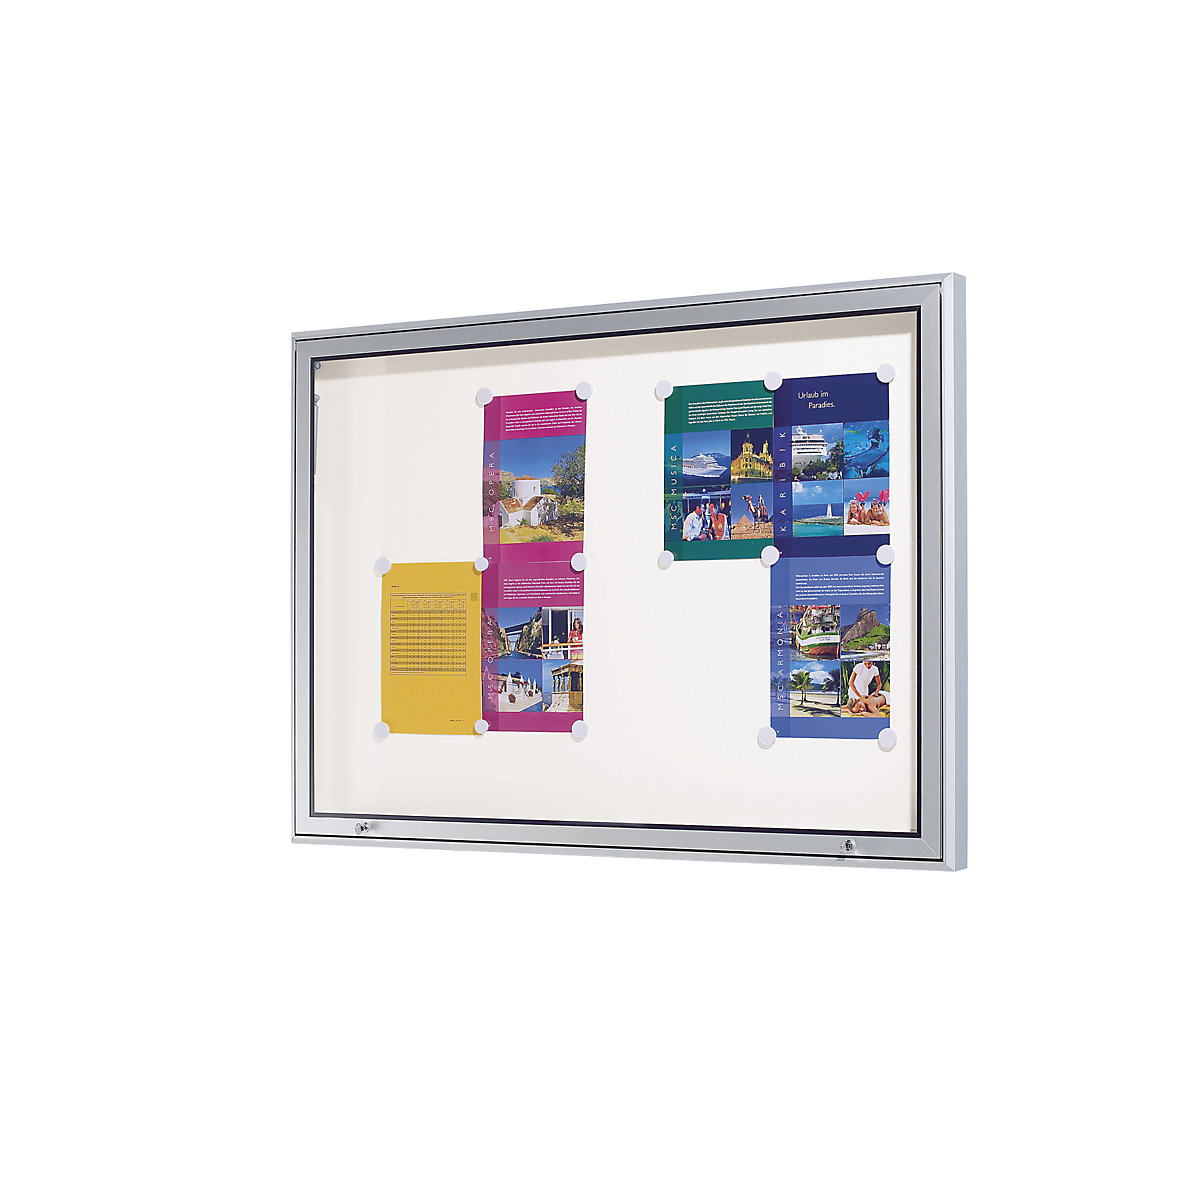 Display case, aluminium frame, for indoor and outdoor use - eurokraft pro